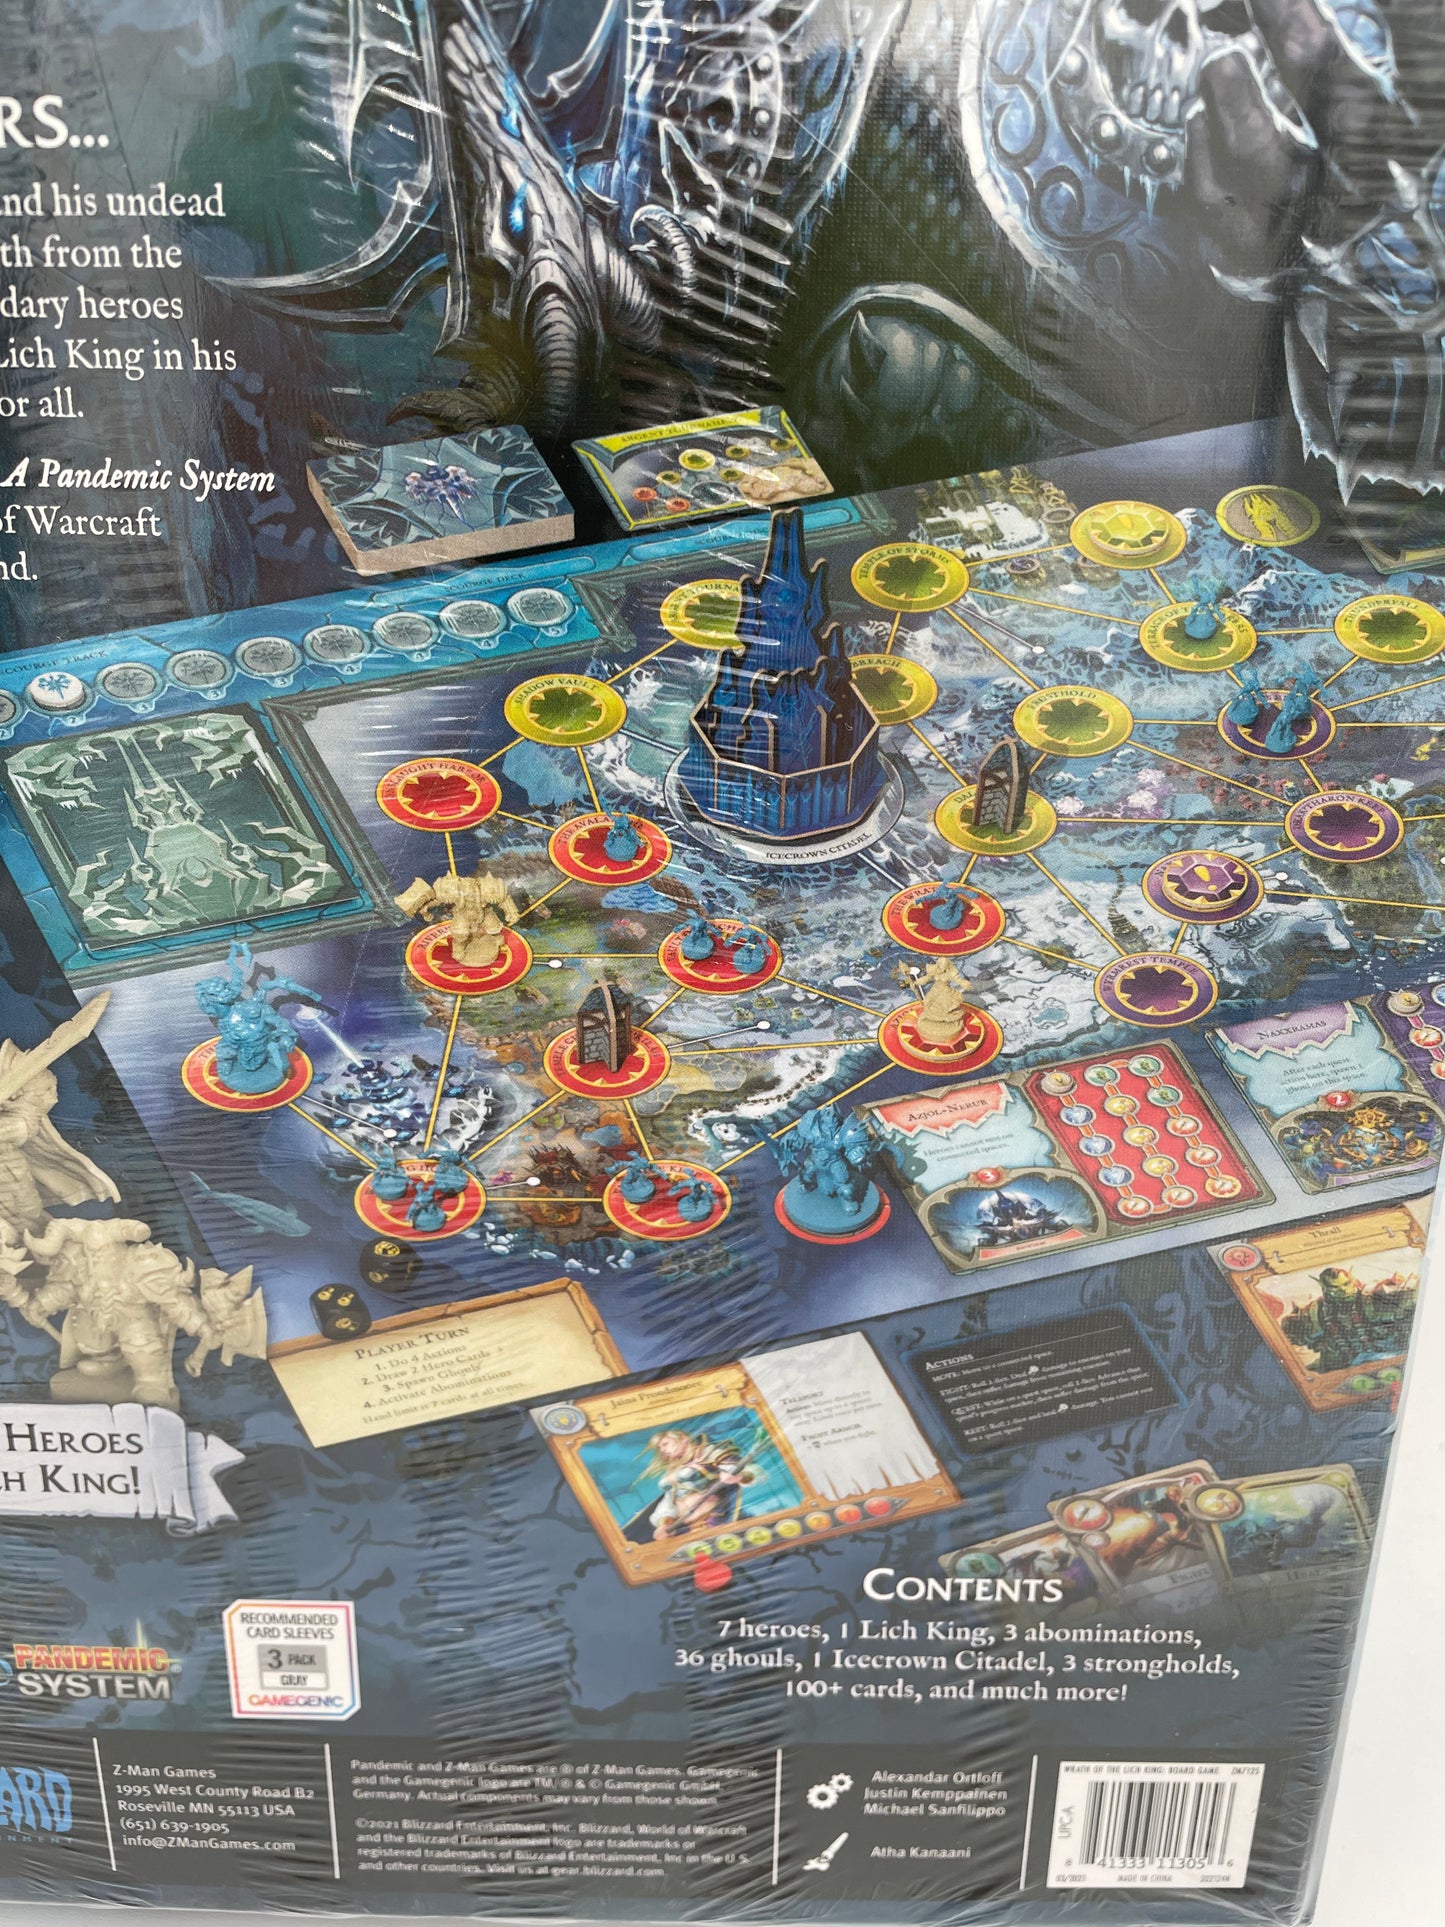 World of Warcraft Board Game - Wrath of the Lich King #101680